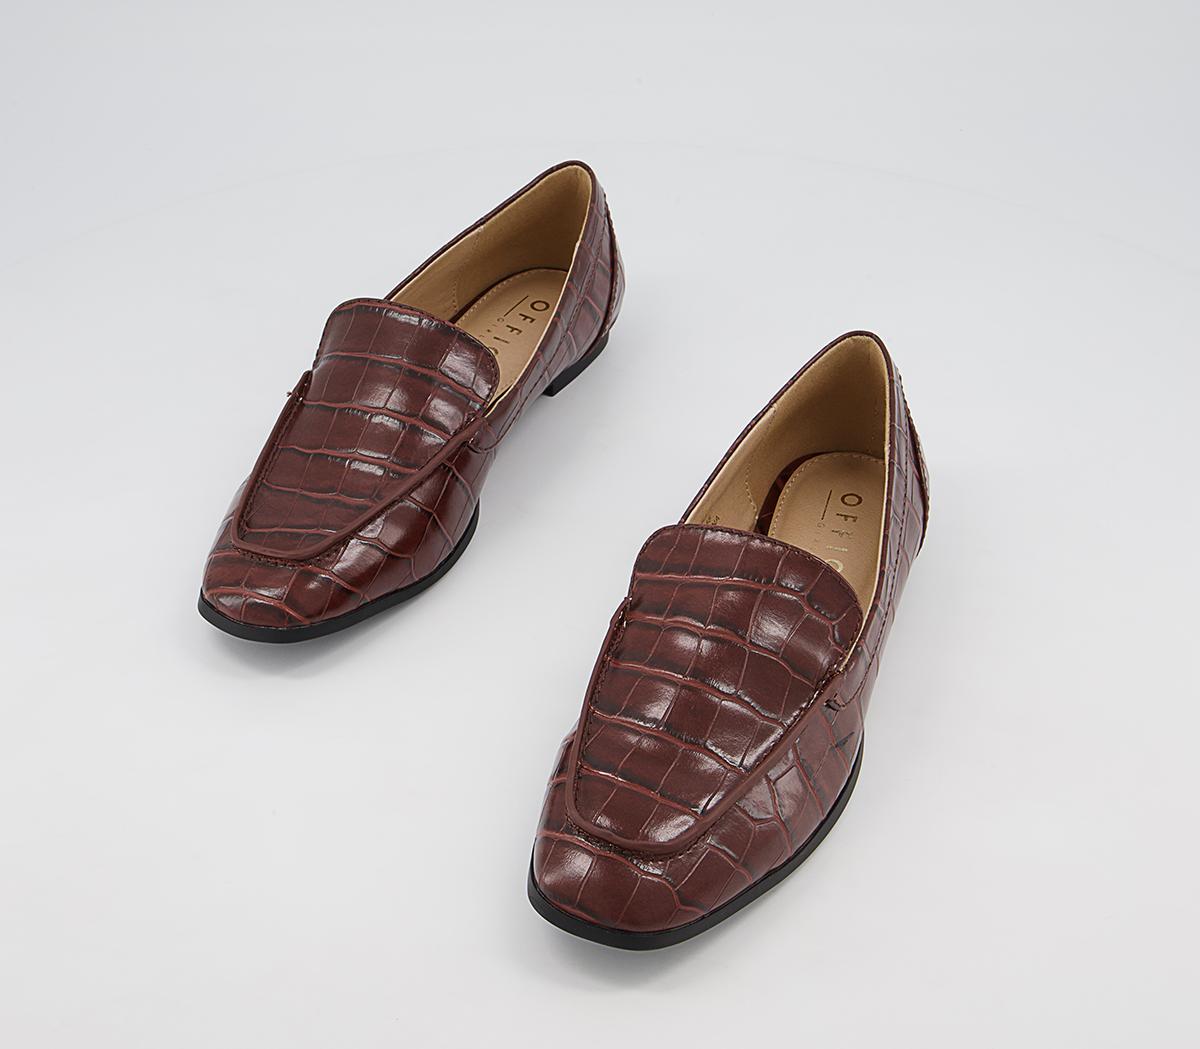 OFFICE Fabric Soft Square Loafers Brown Croc - Flat Shoes for Women